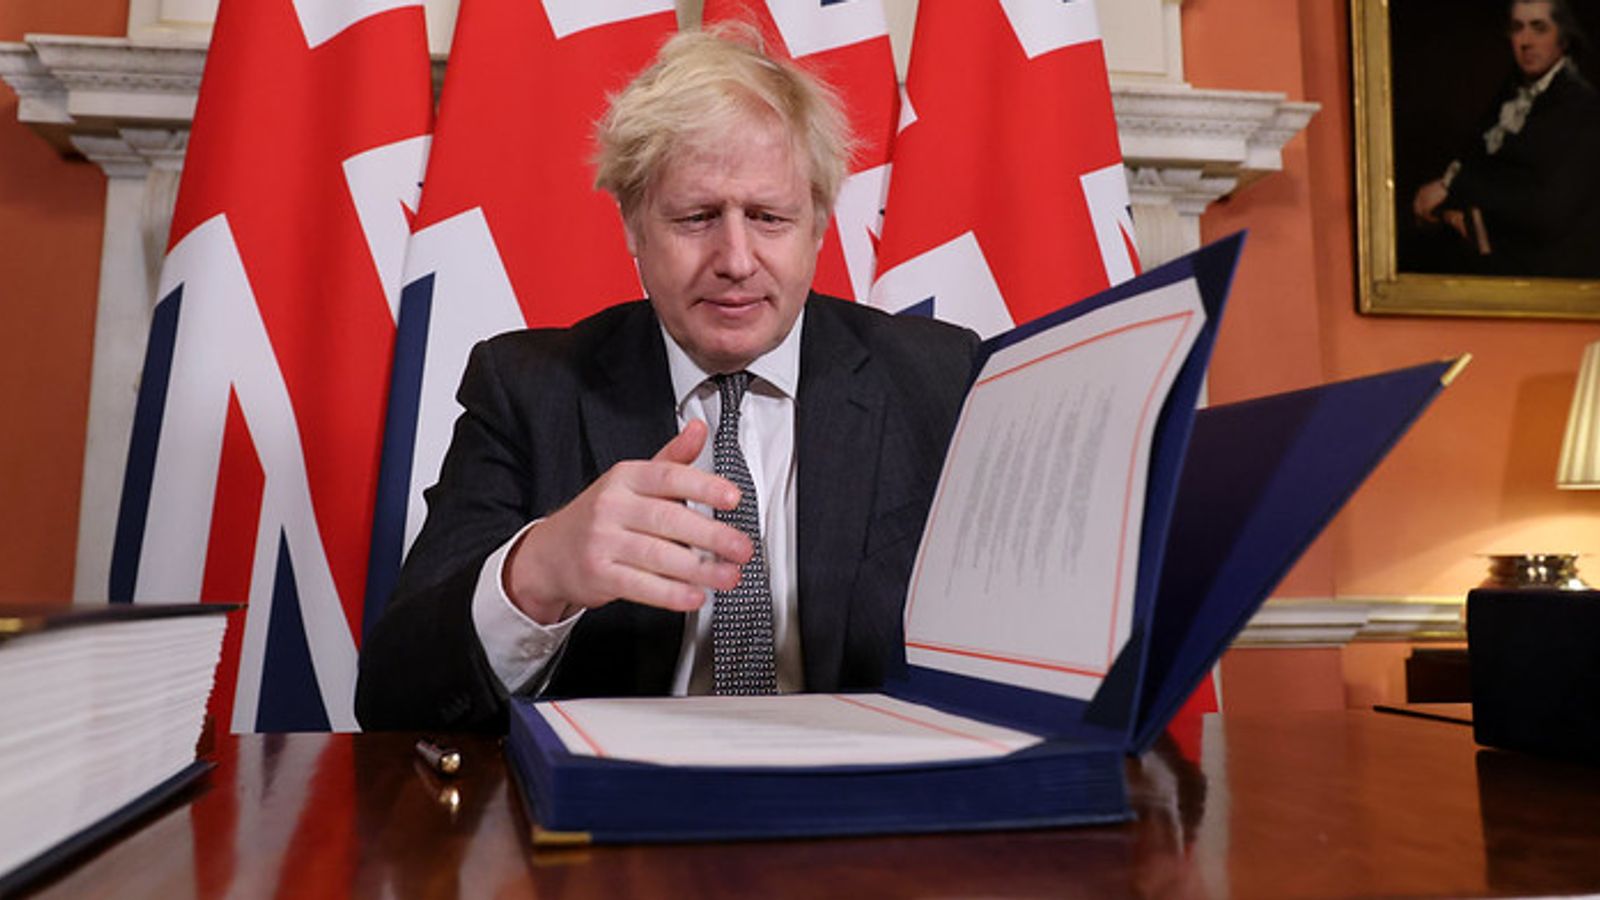 Brexit: Boris Johnson signs Brexit trade deal after MPs give overwhelming backing for EU agreement